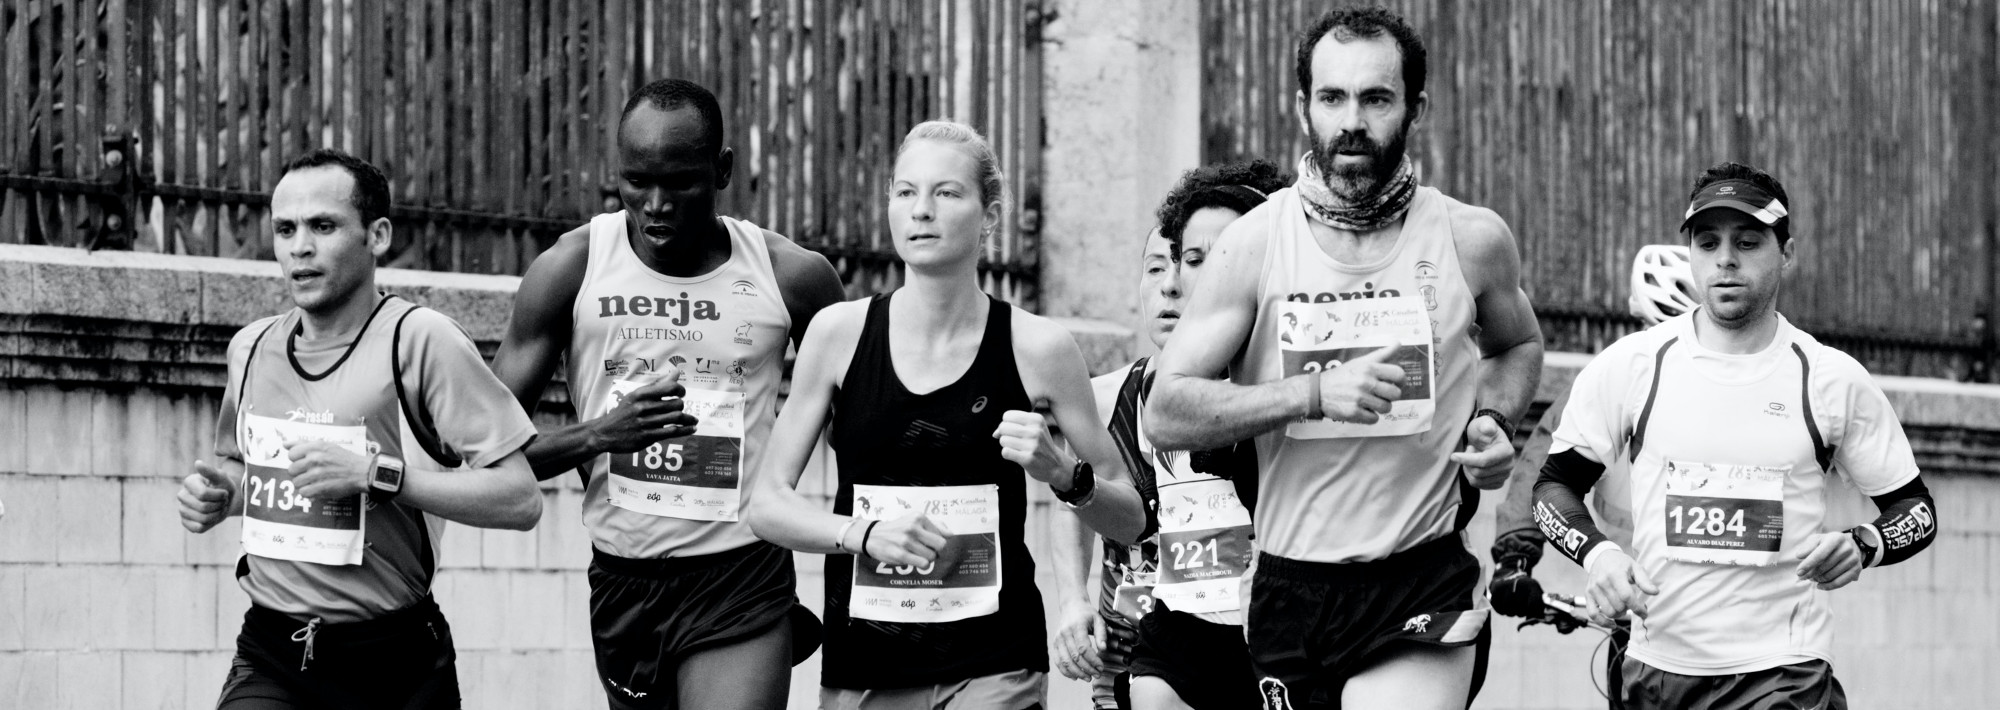 A group of people, of different races and genders, running.